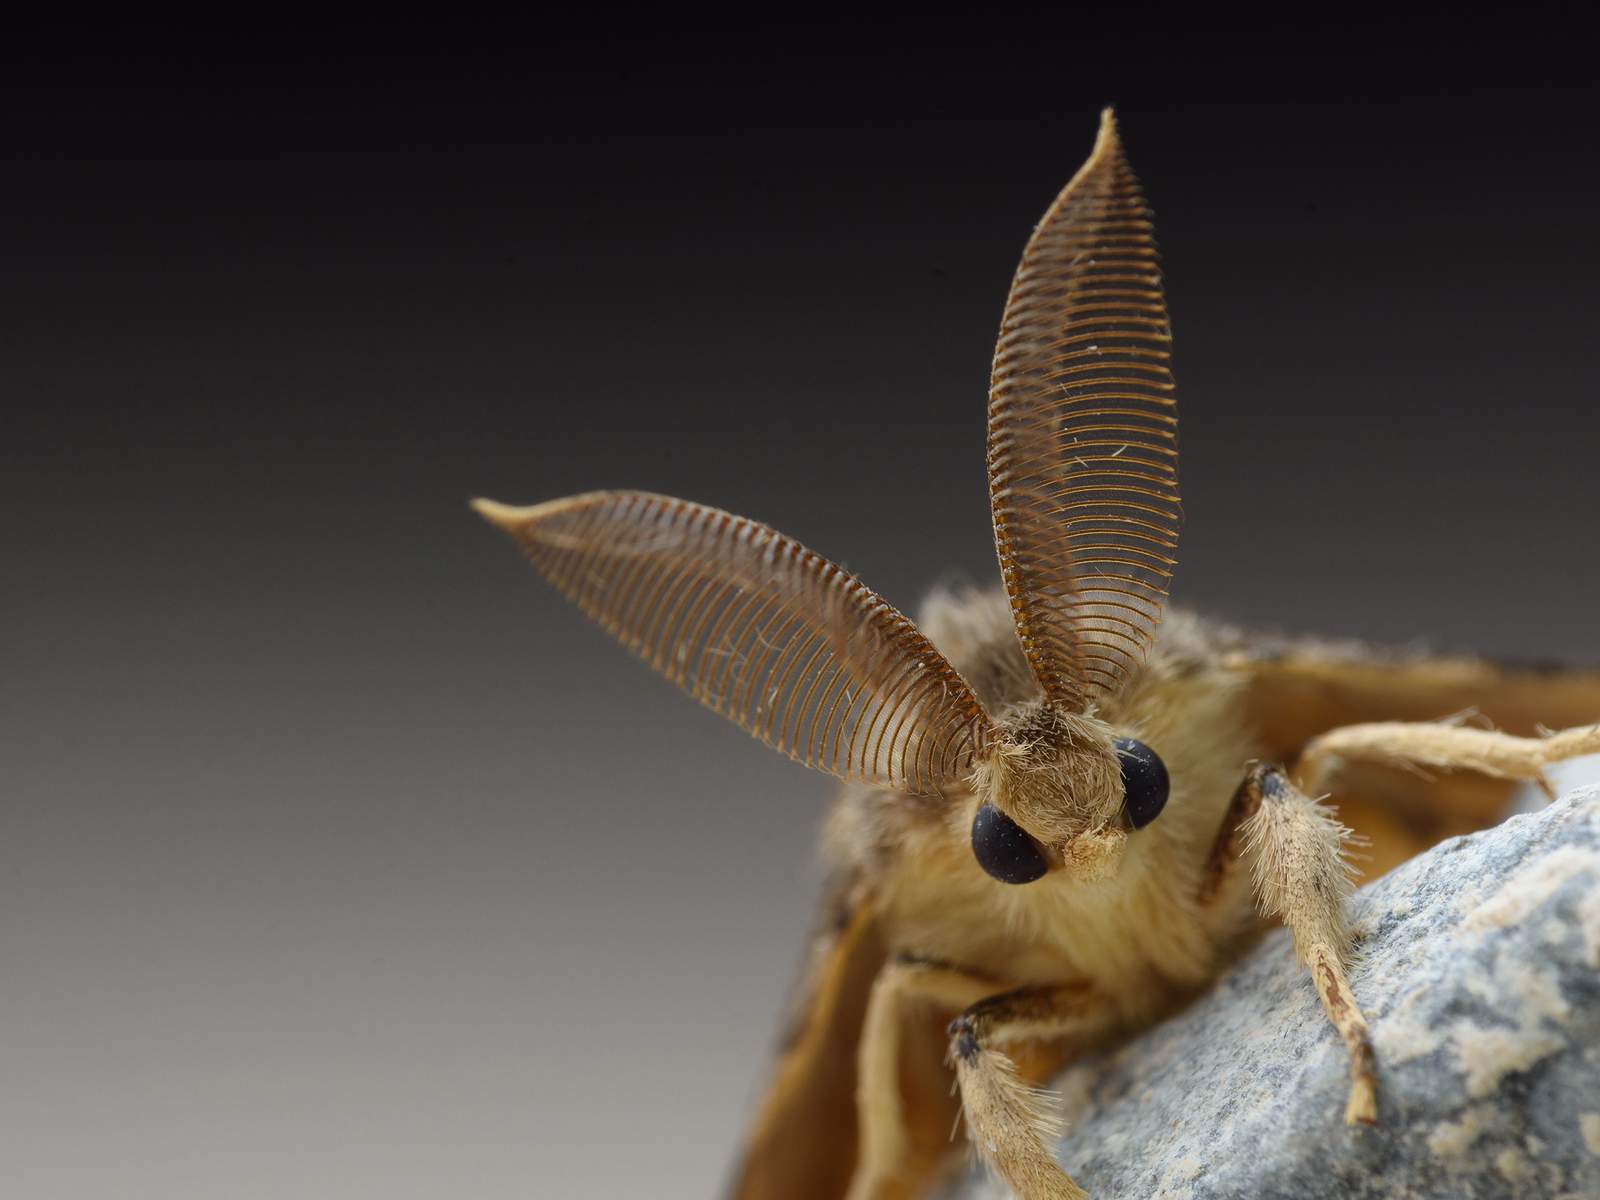 We may have another insect to worry about besides ‘murder hornets’